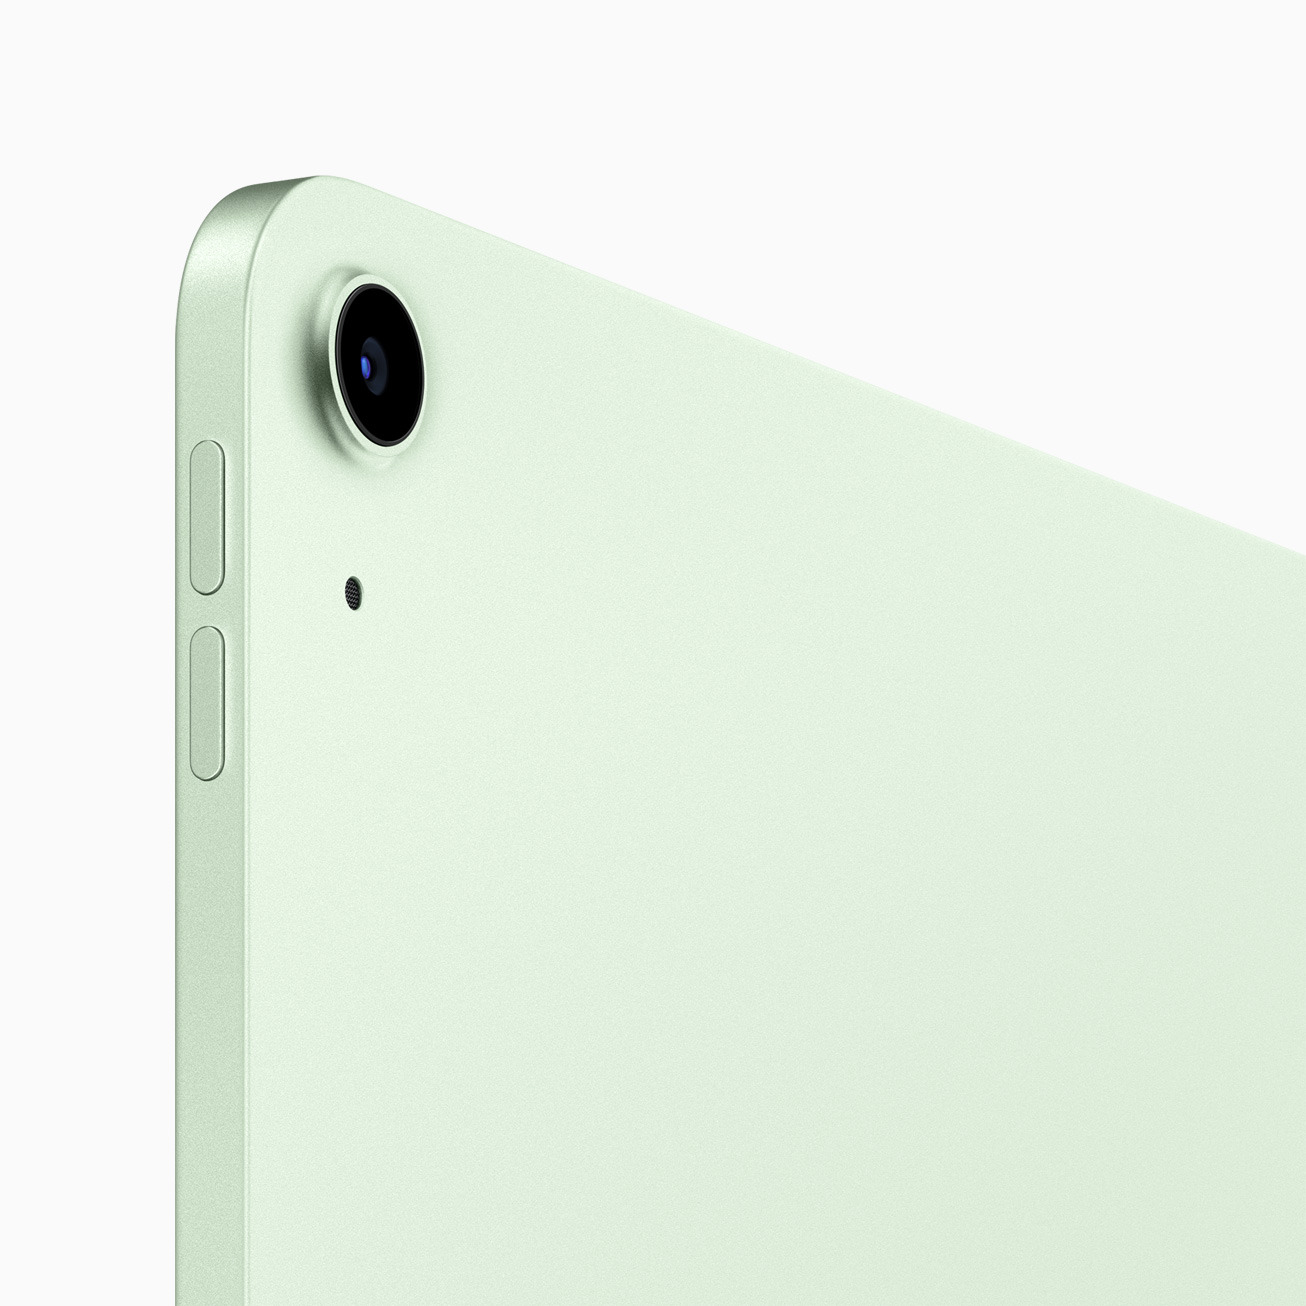 The rear camera on the iPad Air has been upgraded to a 12-megapixel sensor